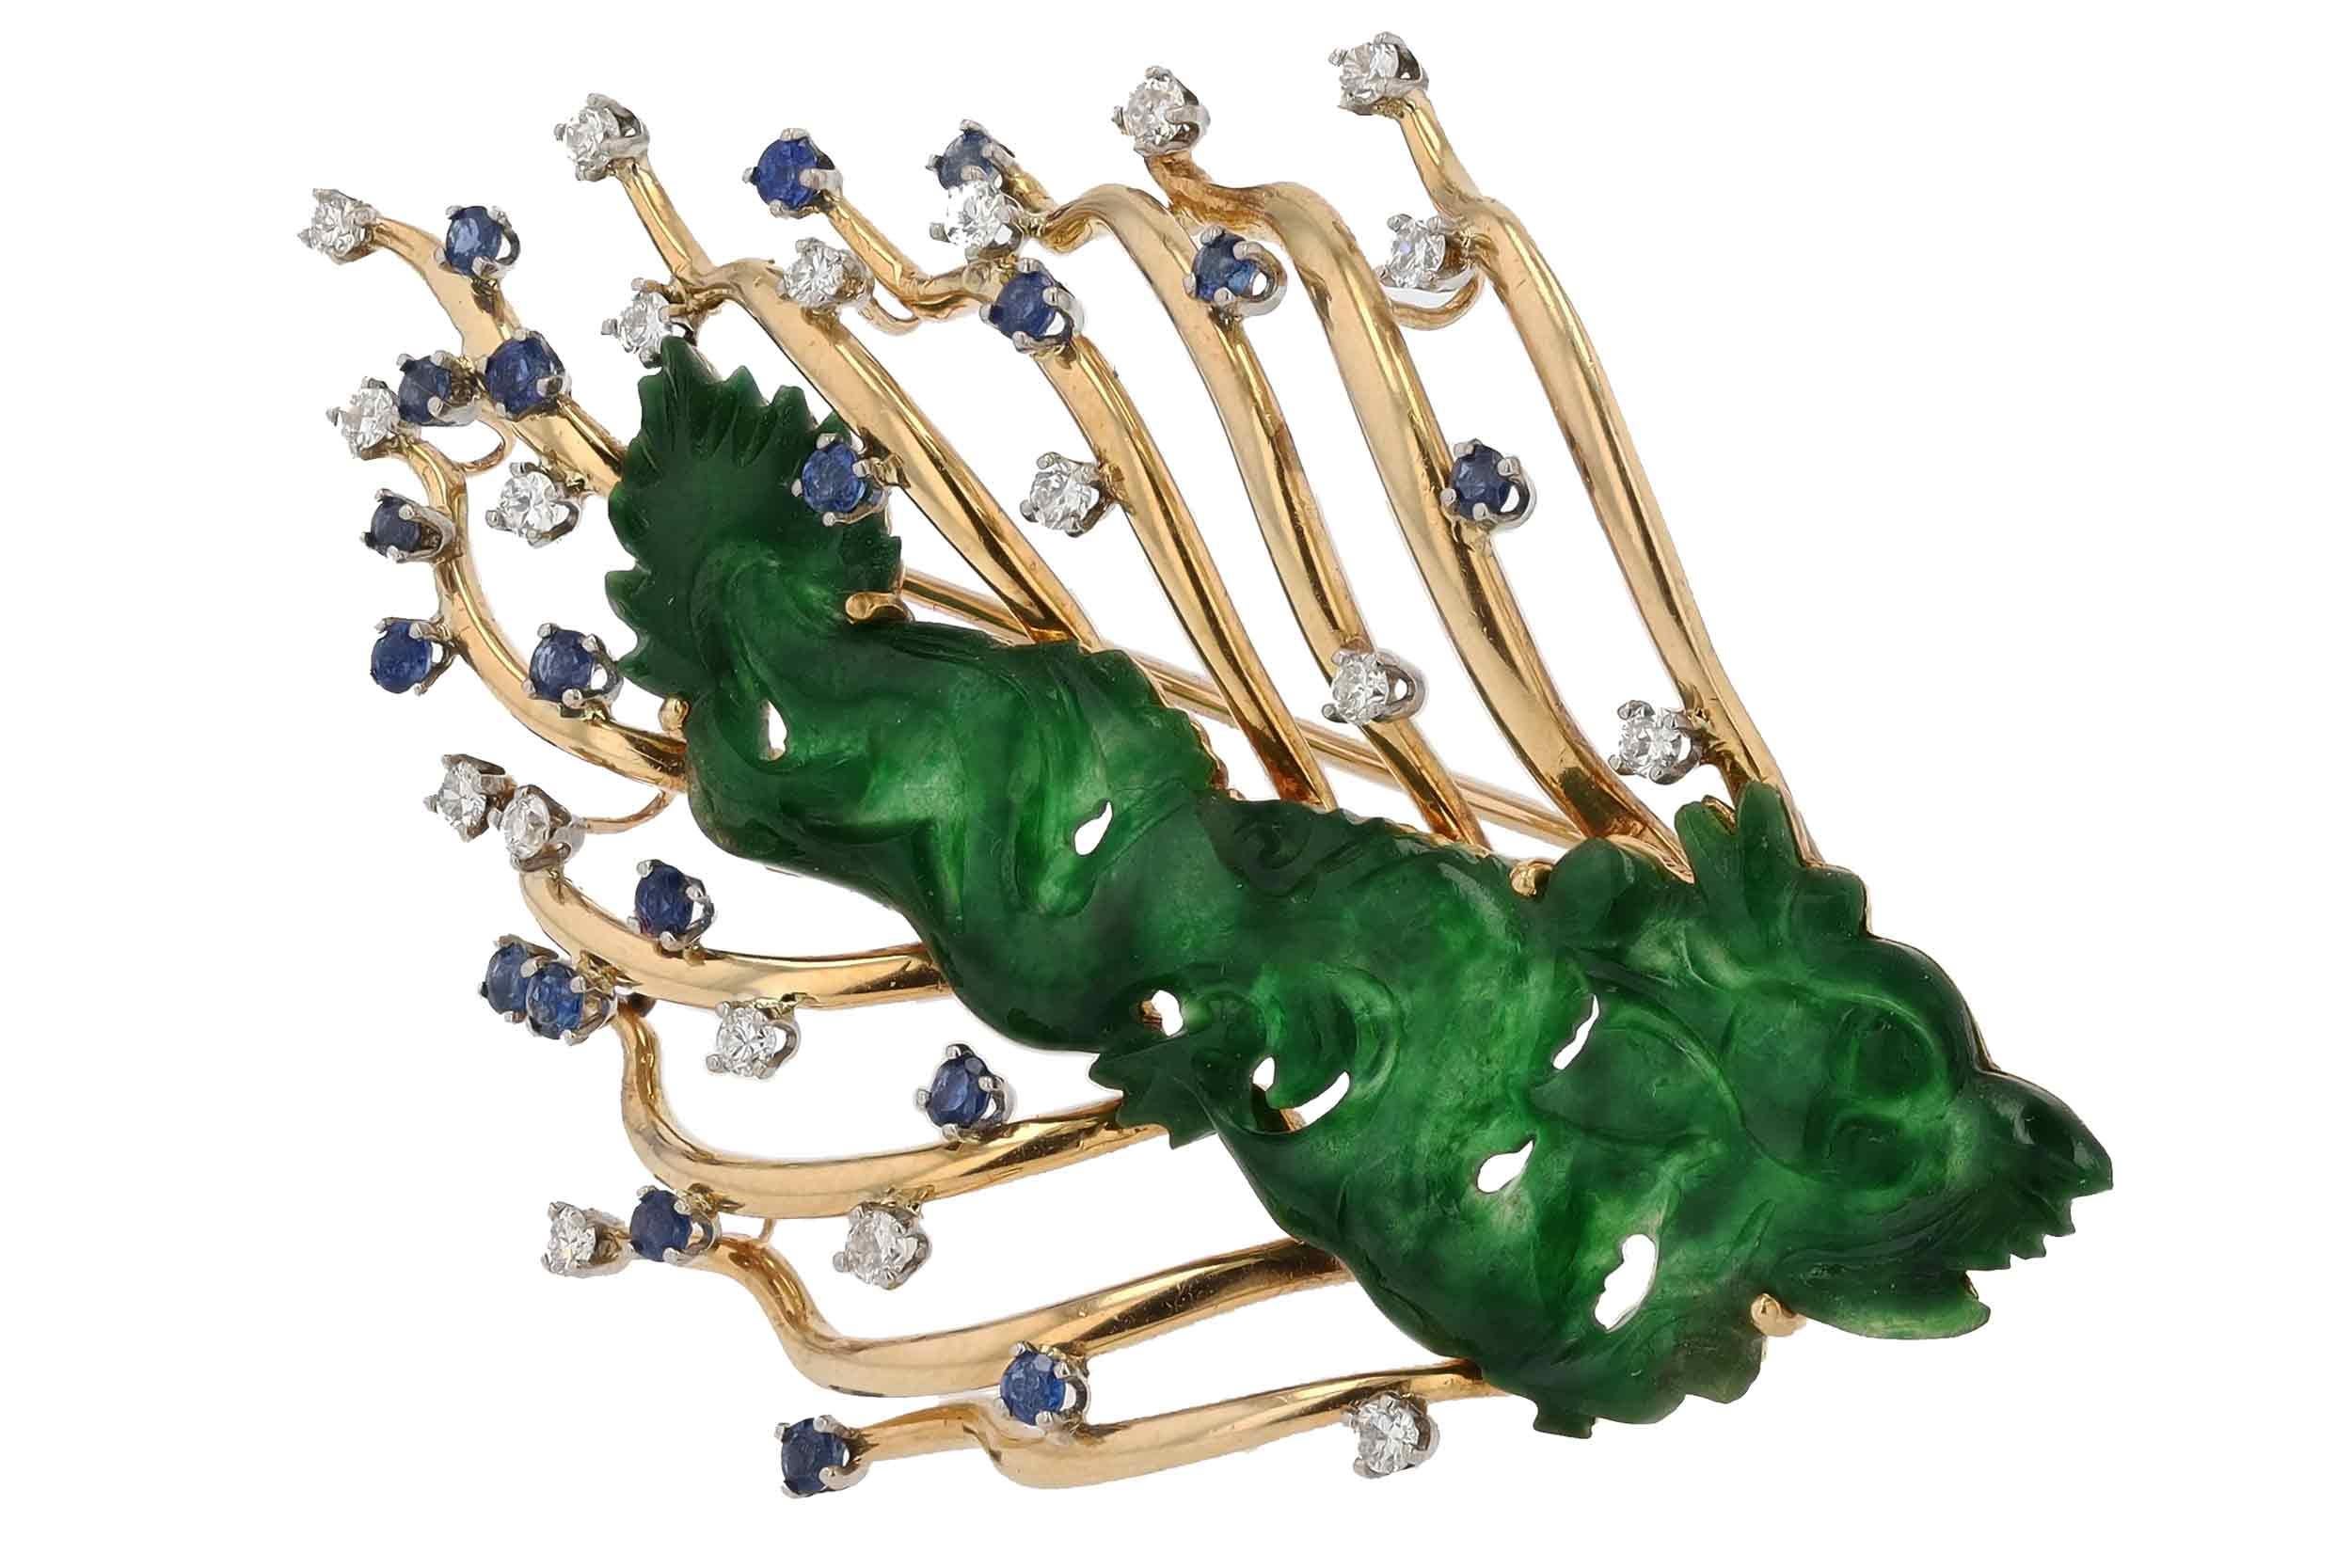 A one of a kind vintage brooch pin, from the distinctive 1960s Modernist Era. The beautifully hand-carved Dragon of natural, Type A untreated Imperial Jade makes a unique and powerful addition to your collection. All natural, 19 diamonds and 18